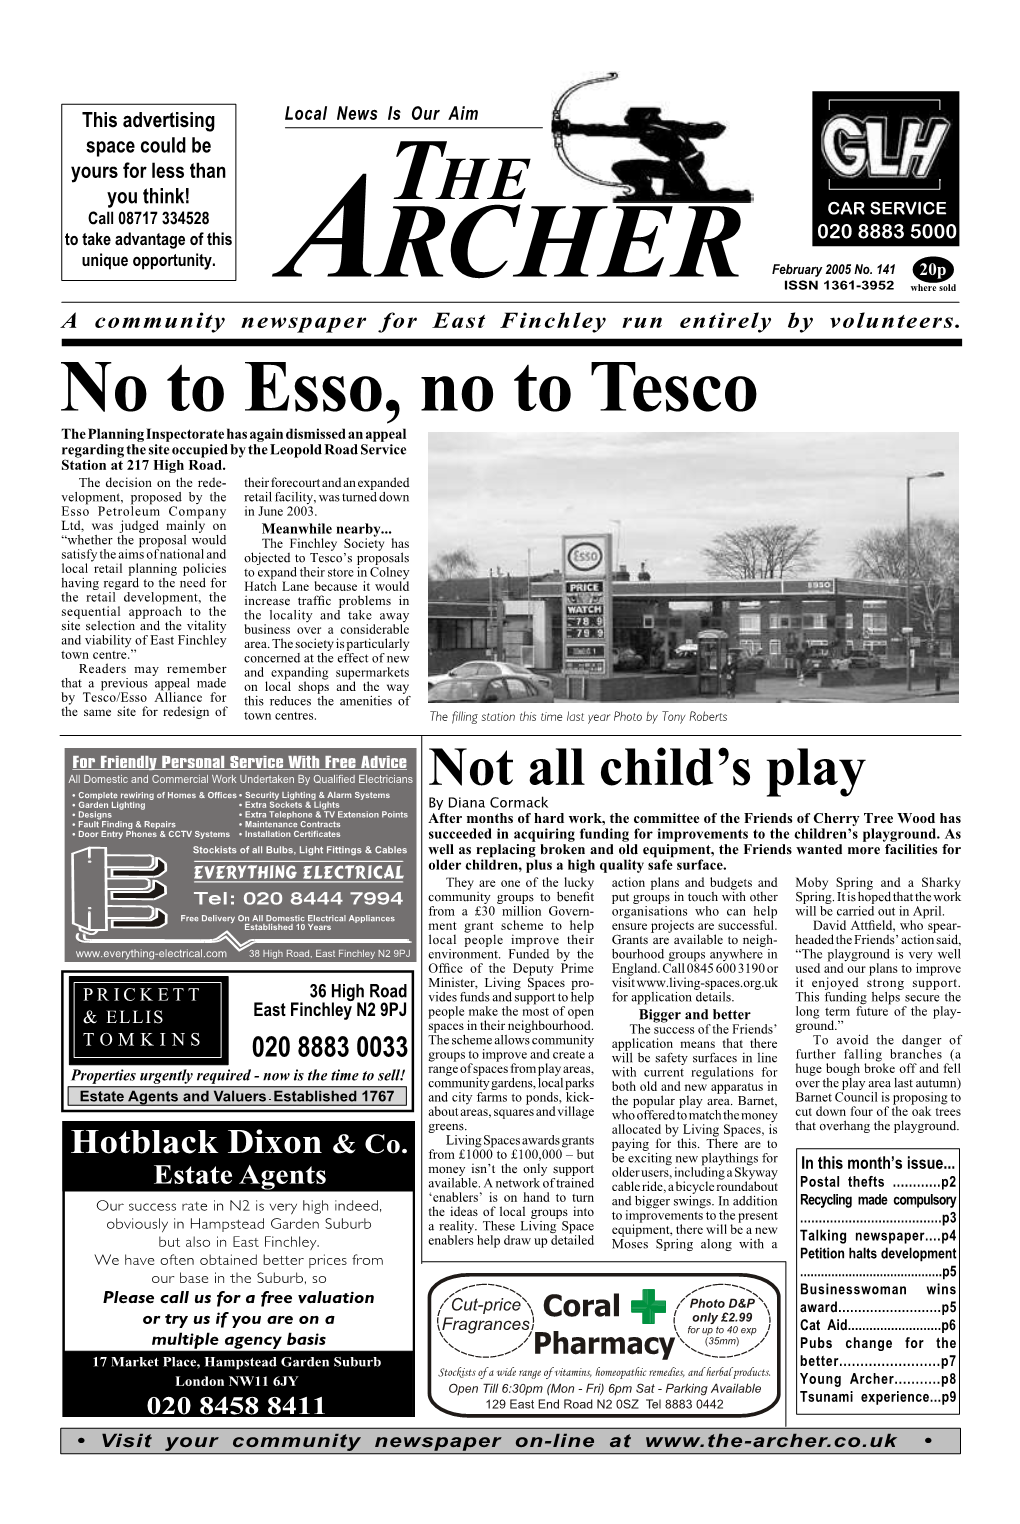 No to Esso, No to Tesco the Planning Inspectorate Has Again Dismissed an Appeal Regarding the Site Occupied by the Leopold Road Service Station at 217 High Road